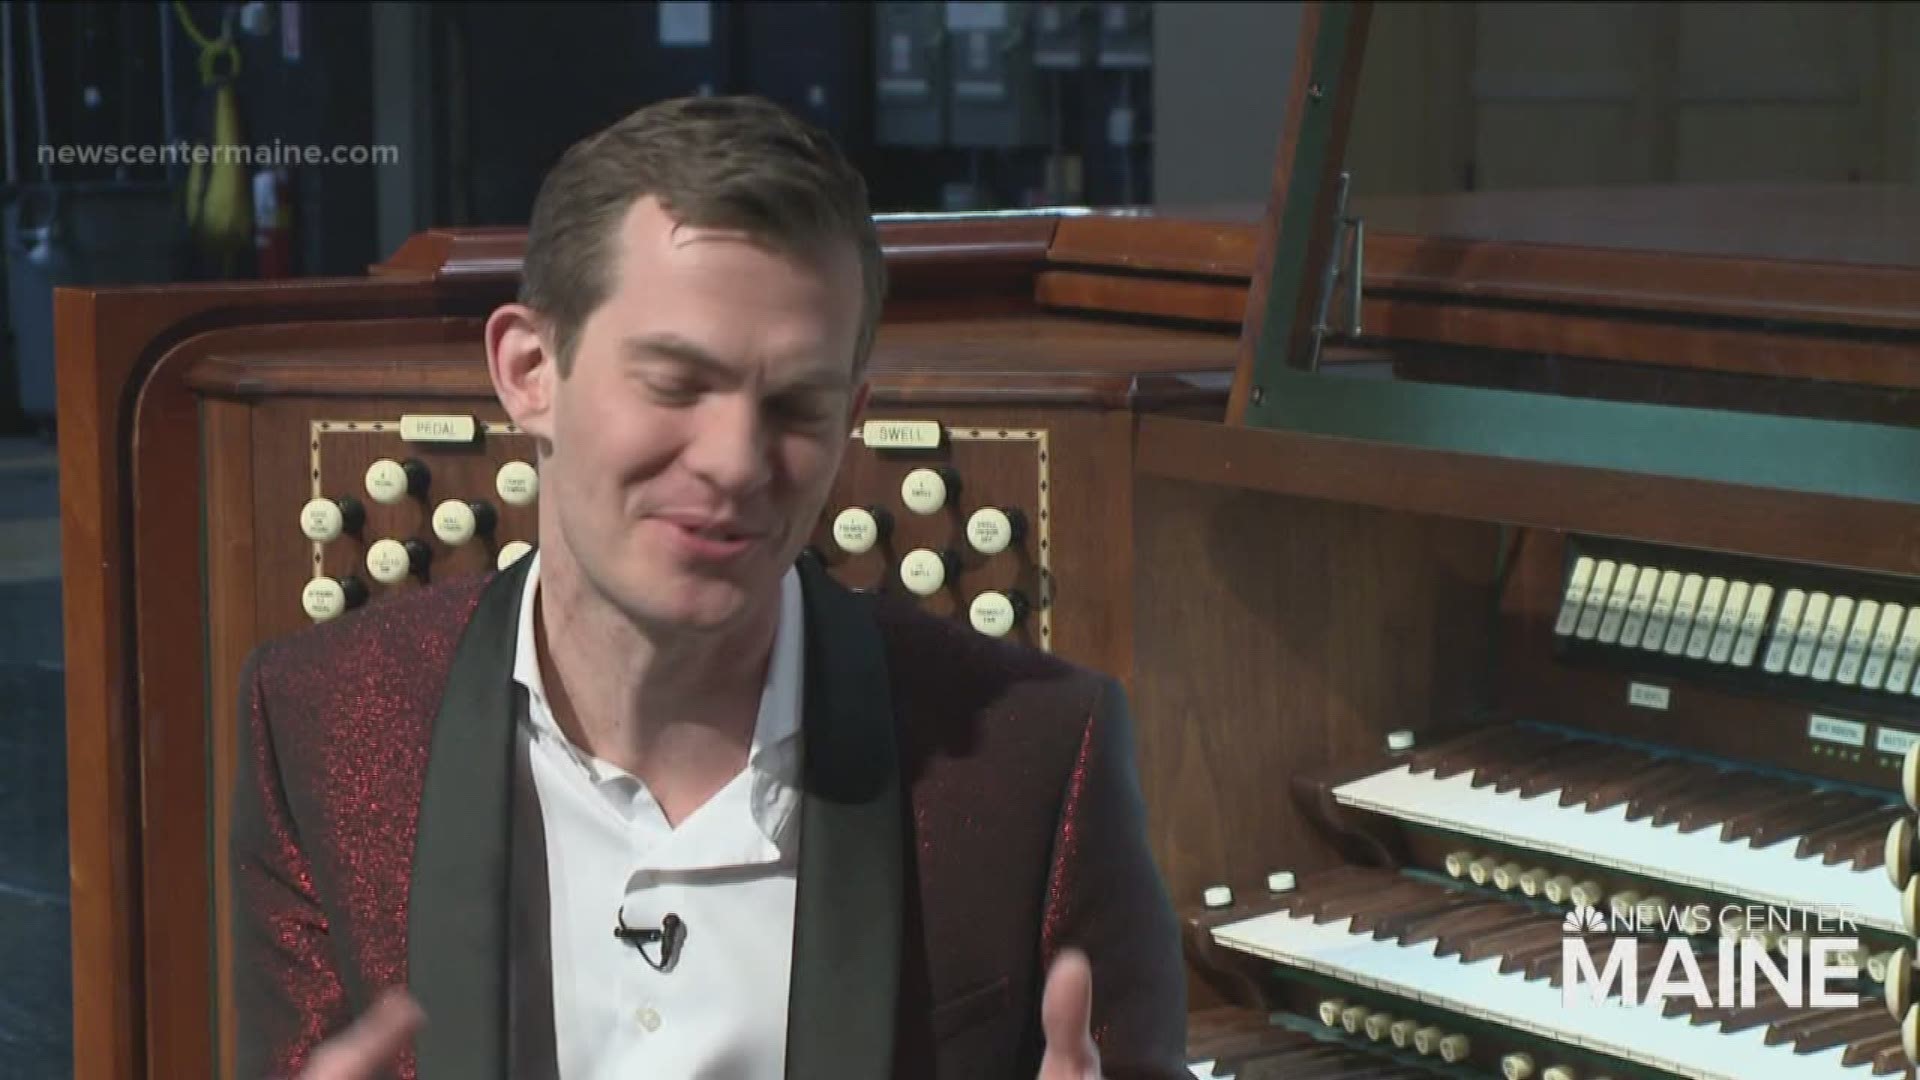 James Kennerley is very enthusiastic about music and he brings that vibrancy to his playing the Kotzschmar Organ.